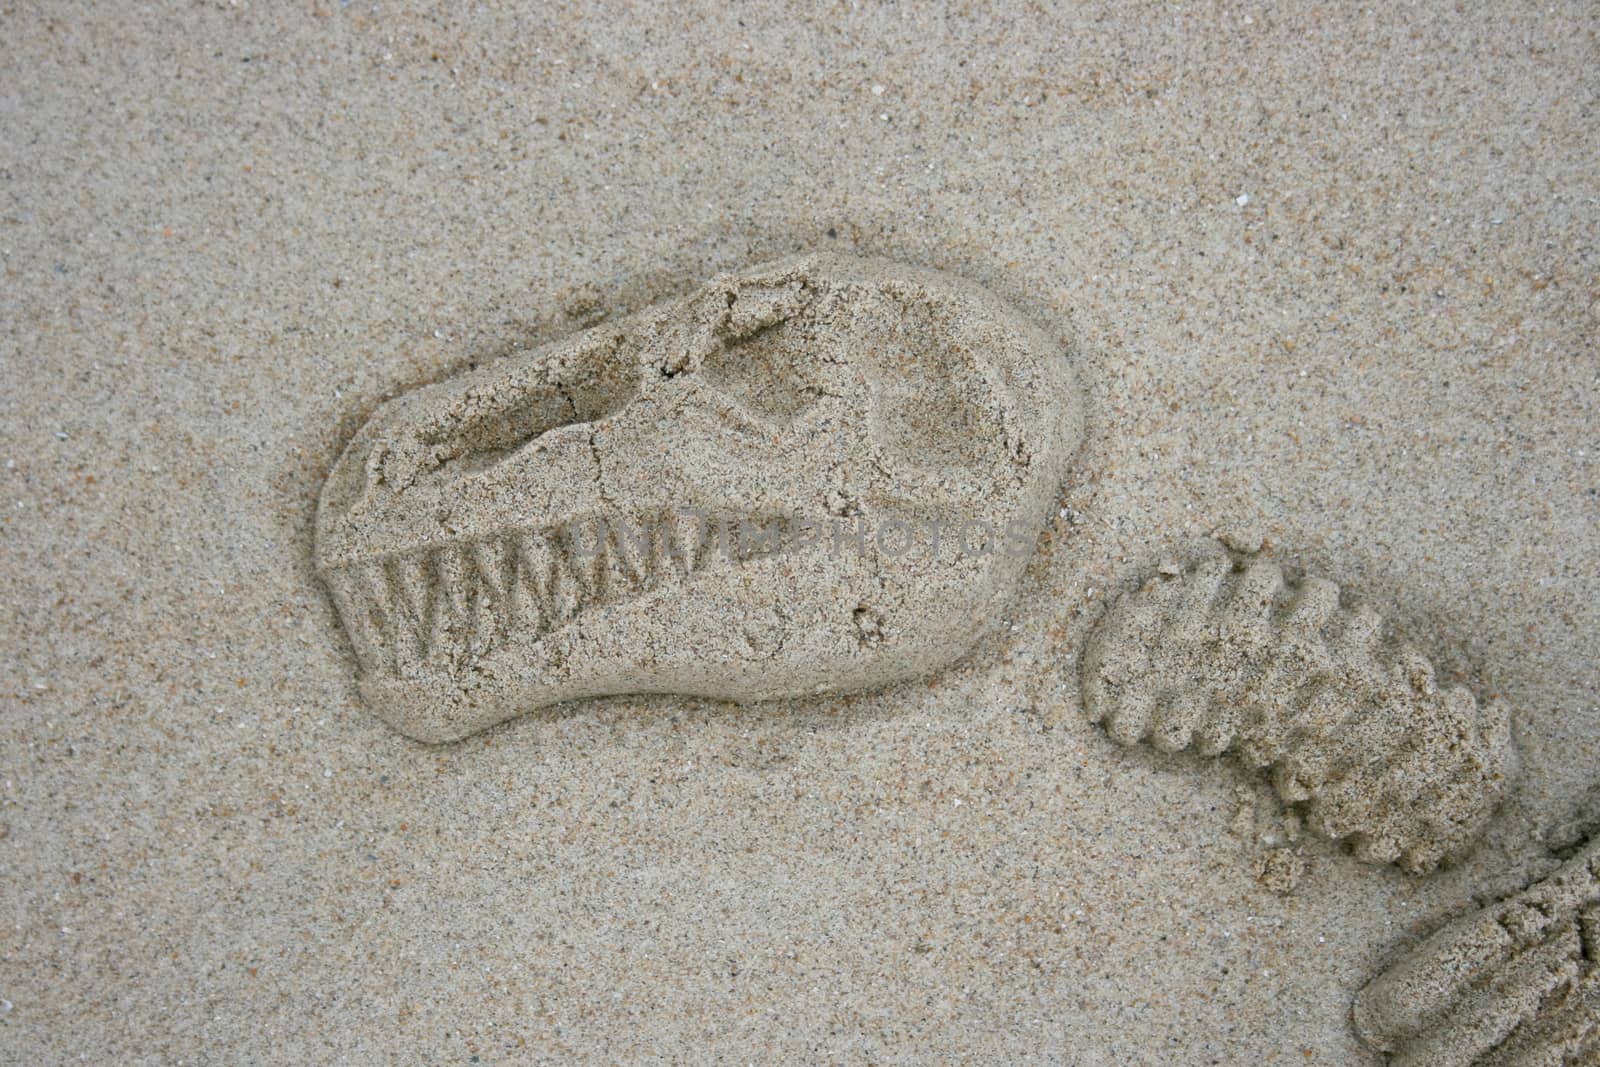 Molded sand contours of a T Rex